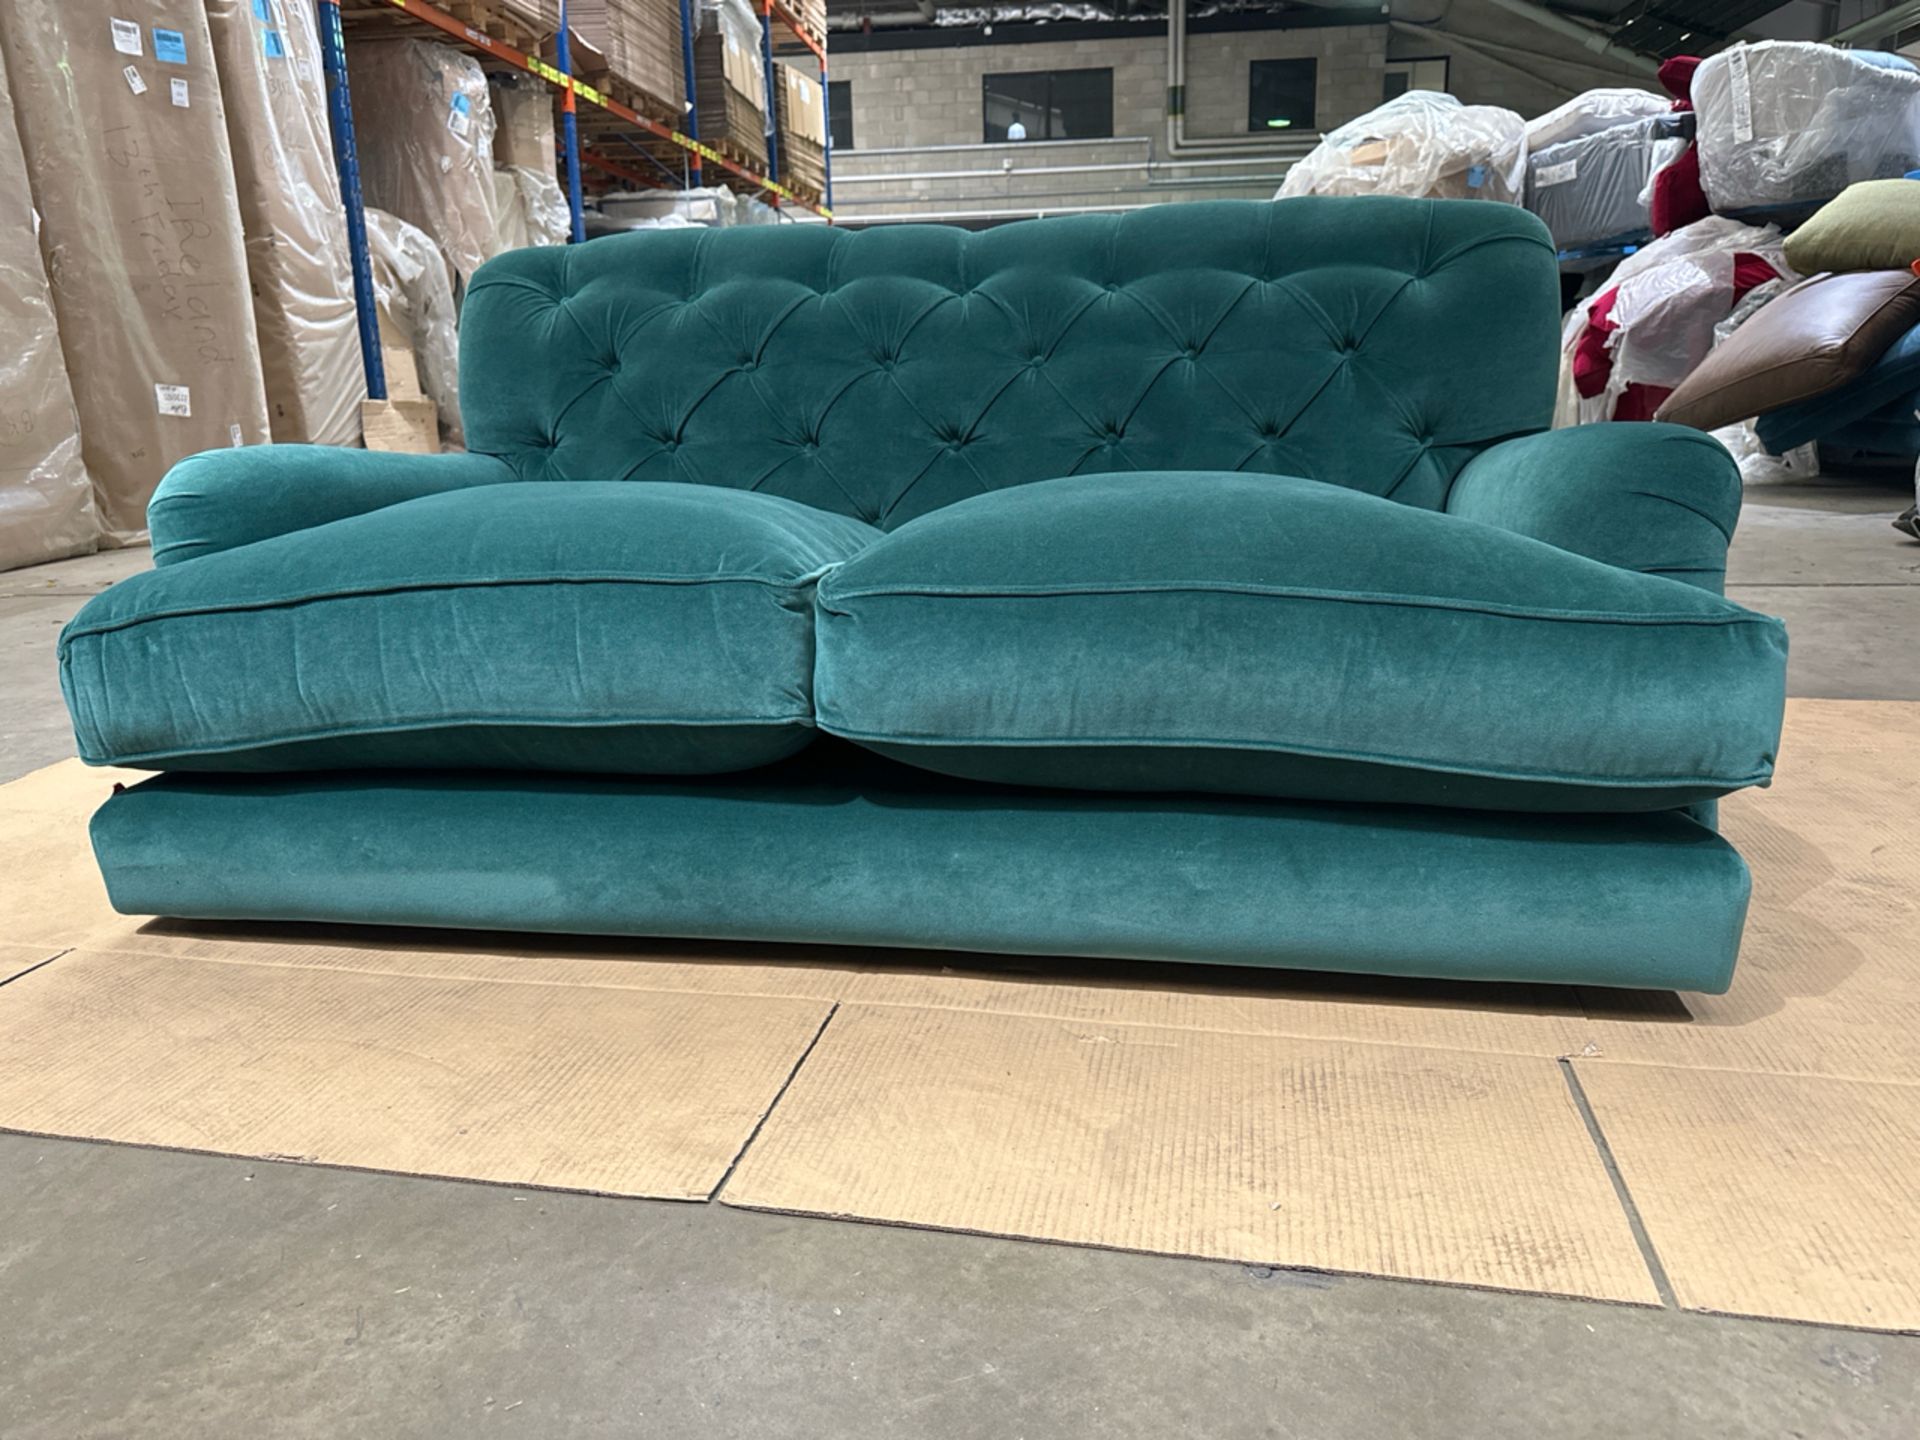 Snowdrop Button Back 2 Seat Sofa In Jade Smart Velvet RRP - £1890 - Image 2 of 6